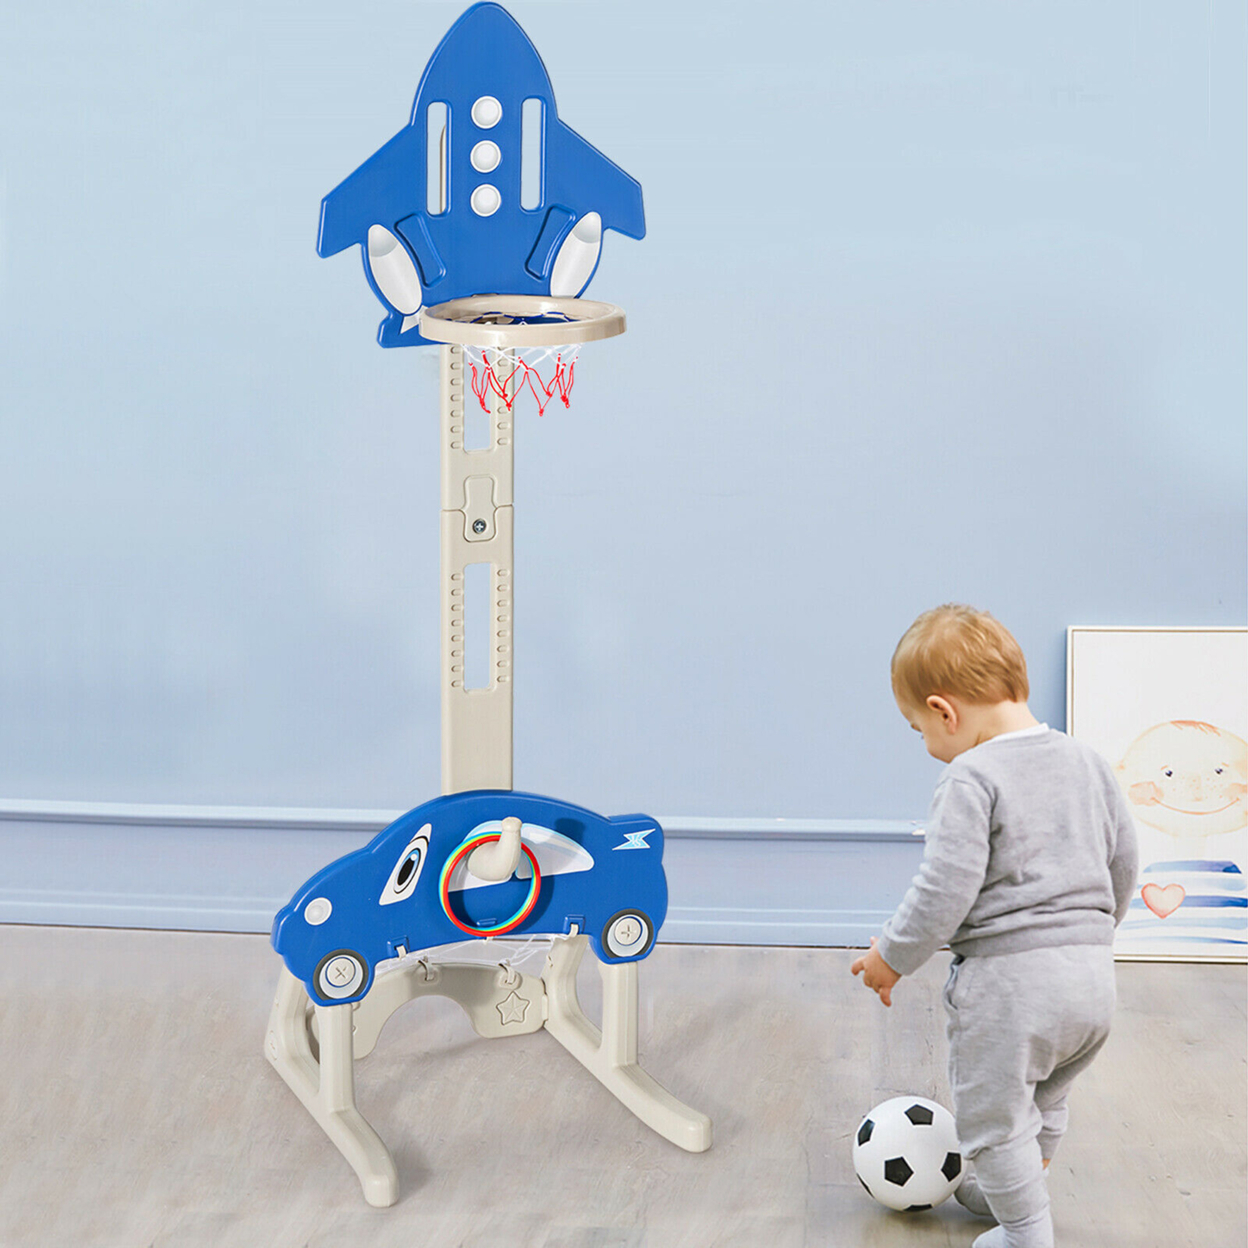 3-in-1 Basketball Hoop For Kids Adjustable Height Playset W/ Balls Blue